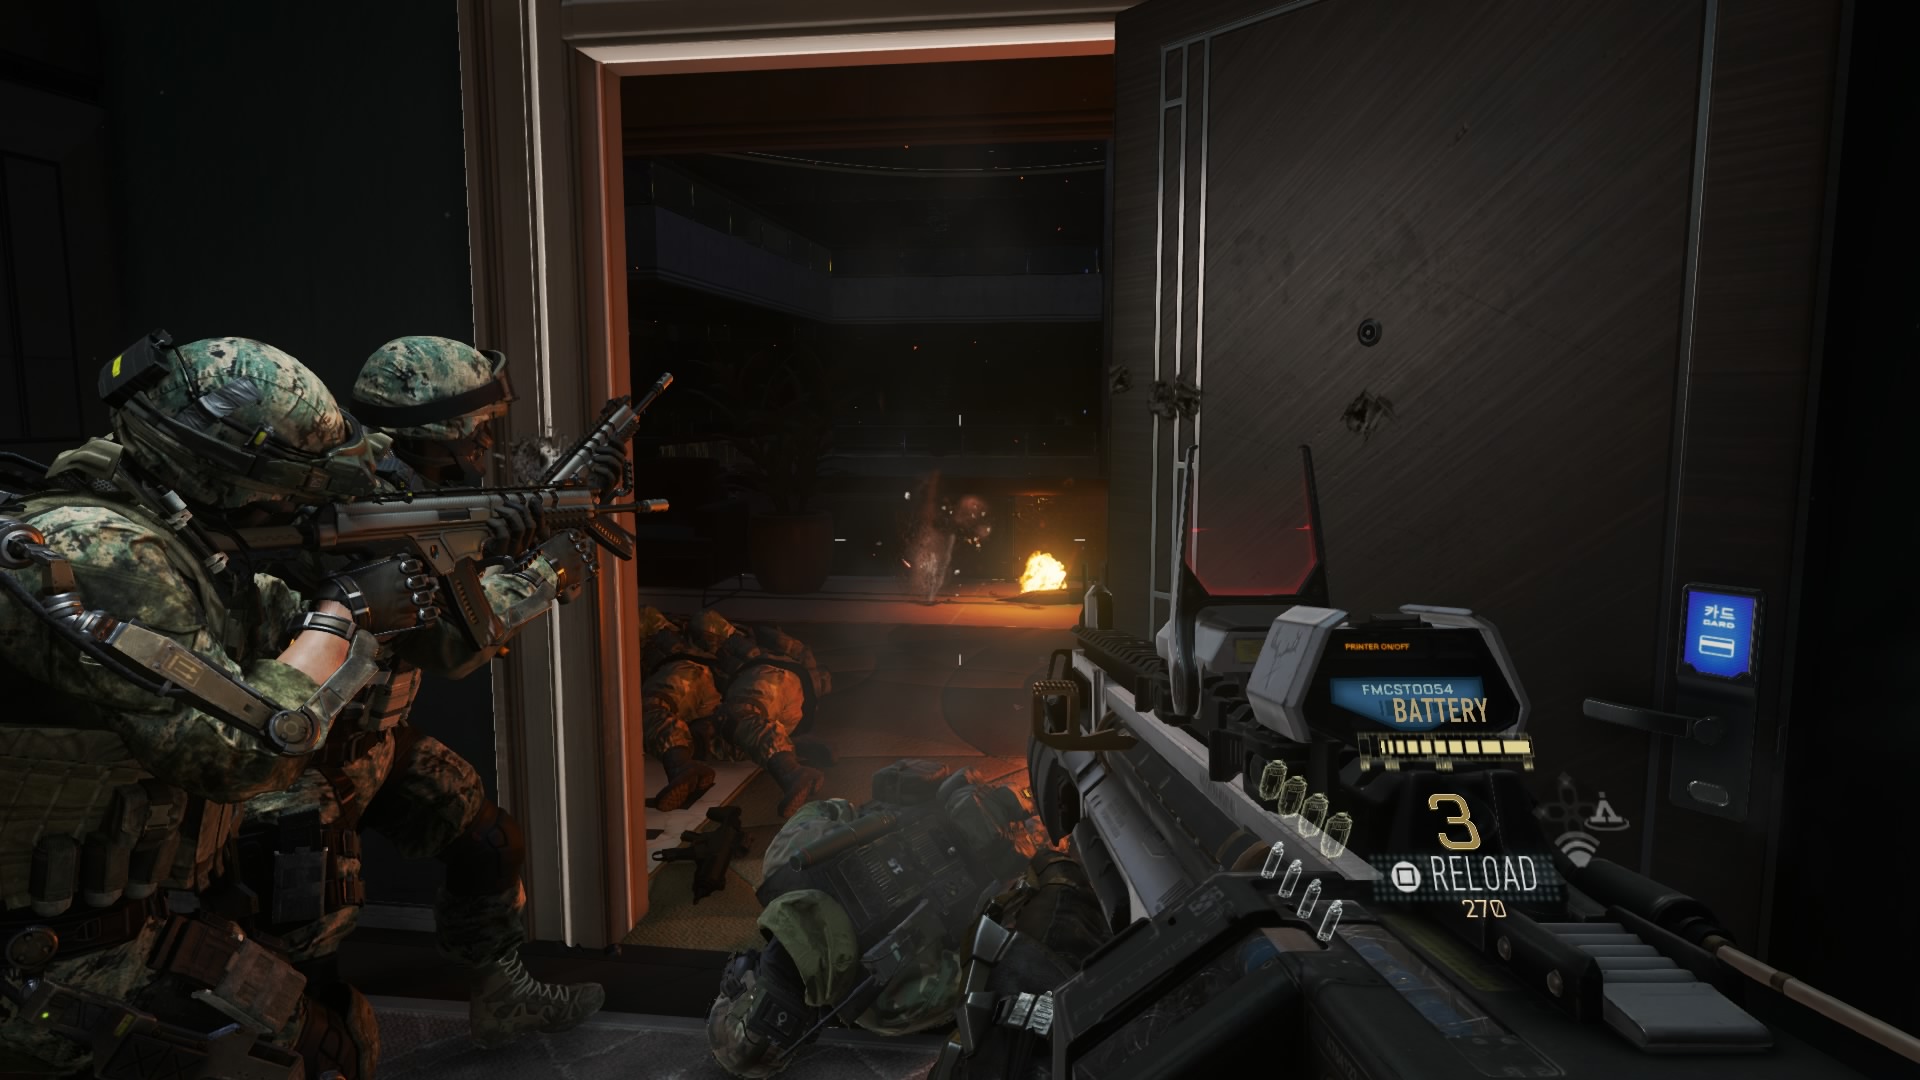 Call of Duty: Advanced Warfare runs at 1080p with medium quality-post AA on PS4